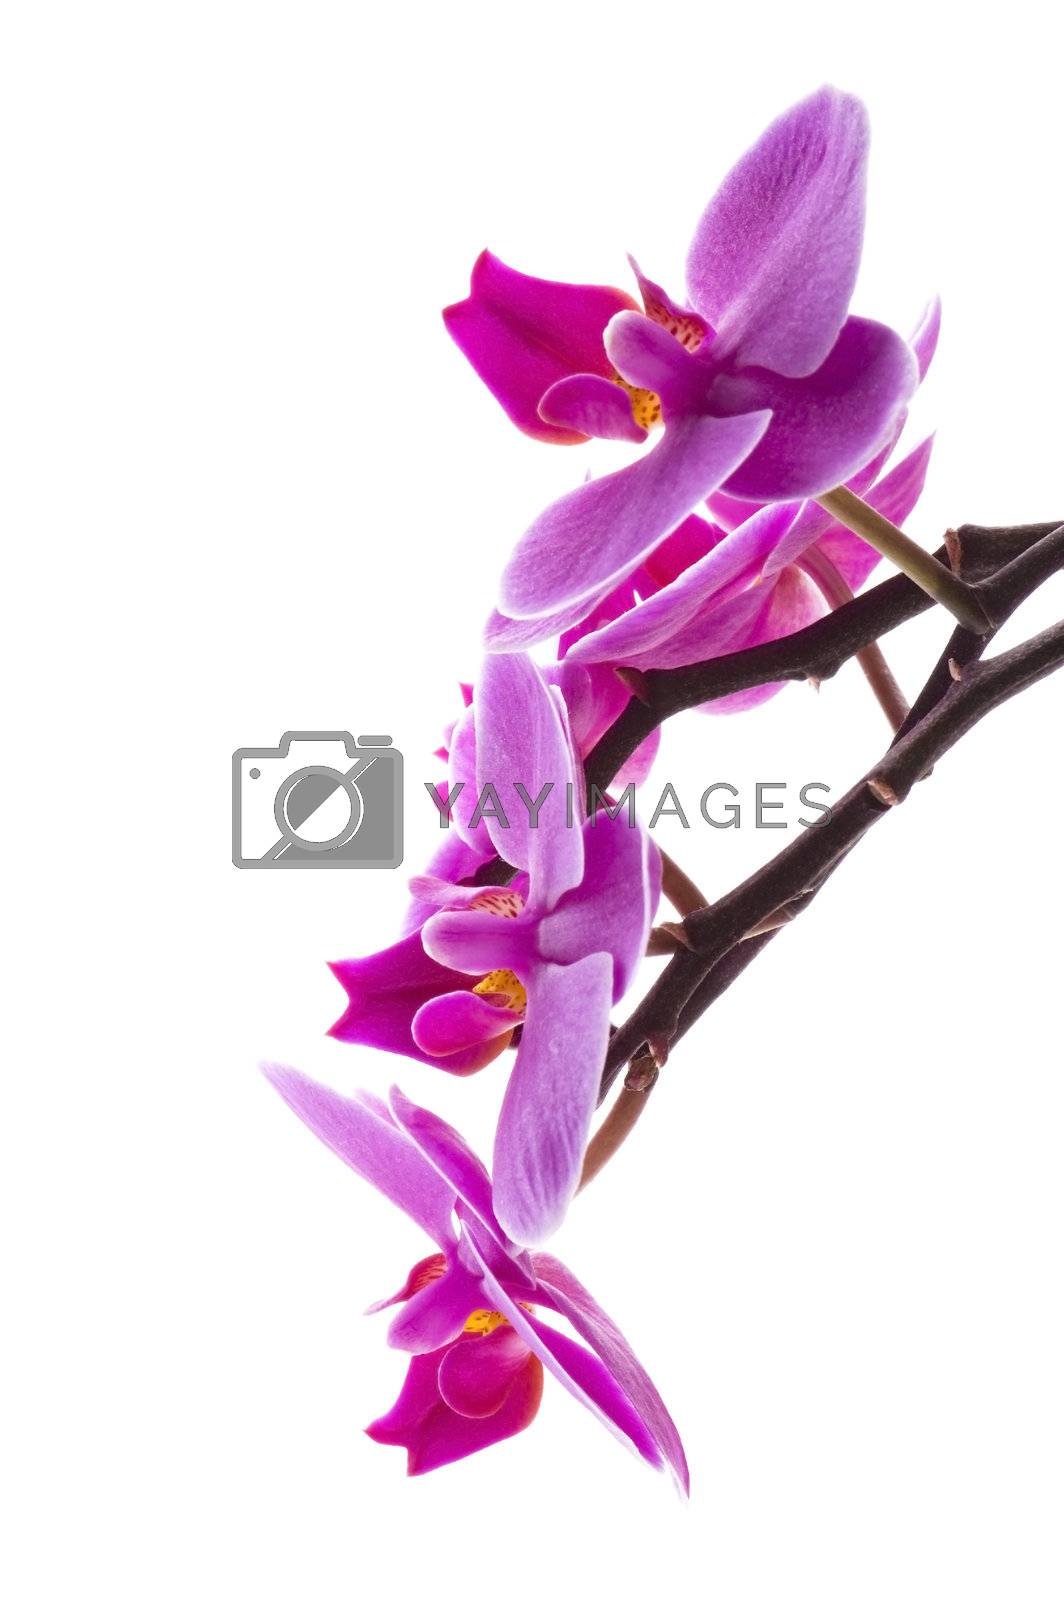 Royalty free image of orchid by joannawnuk